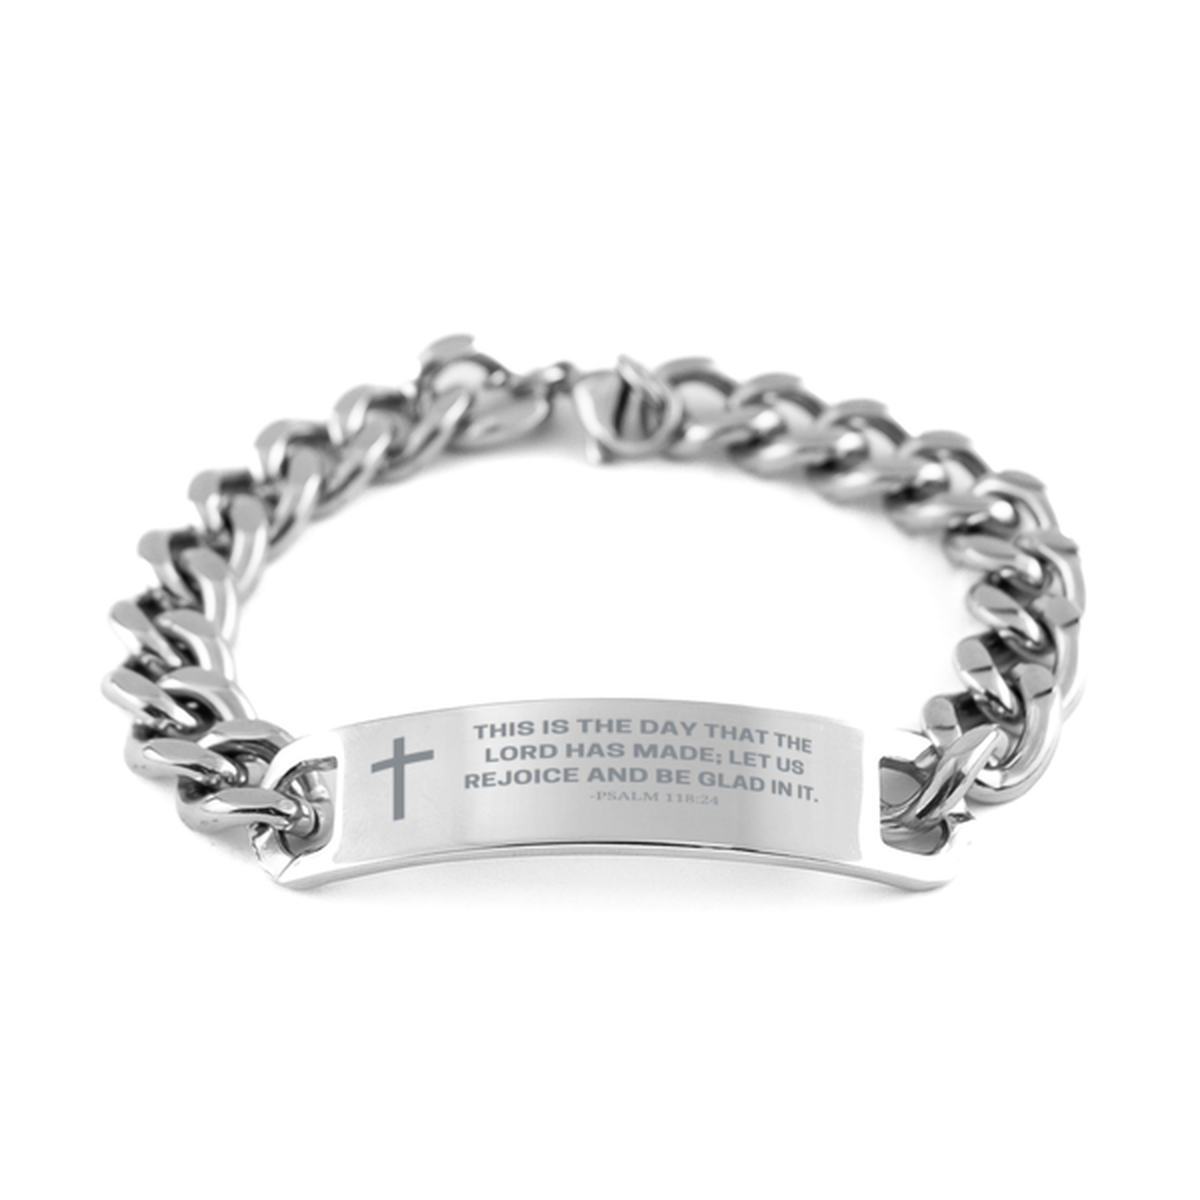 Baptism Gifts For Teenage Boys Girls, Christian Bible Verse Cuban Chain Bracelet, This is the day that the lord has made, Catholic Confirmation Gifts for Son, Godson, Grandson, Nephew